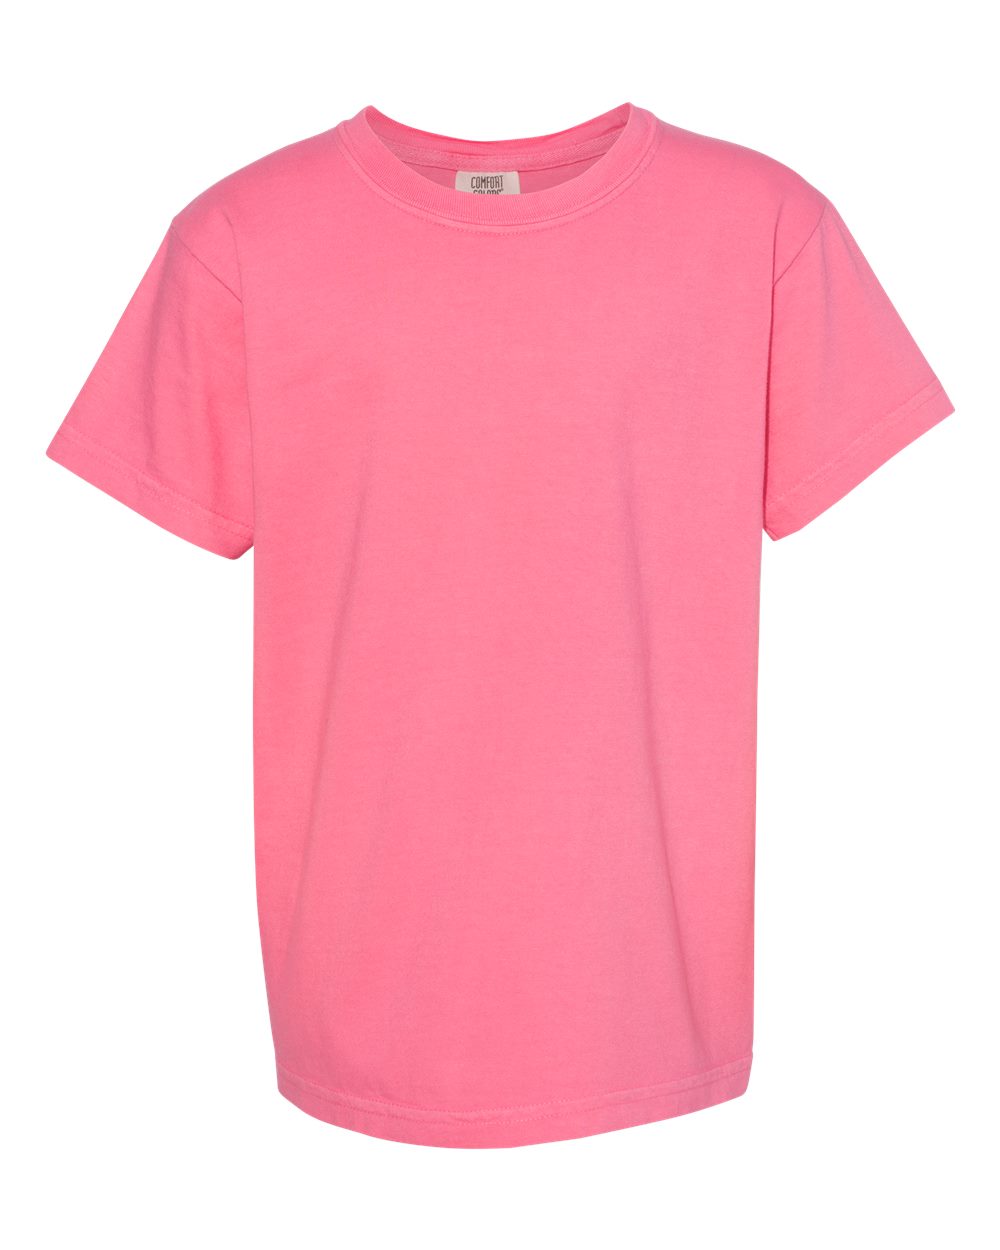 Comfort Colors - Garment-Dyed Youth Heavyweight T-Shirt - 9018